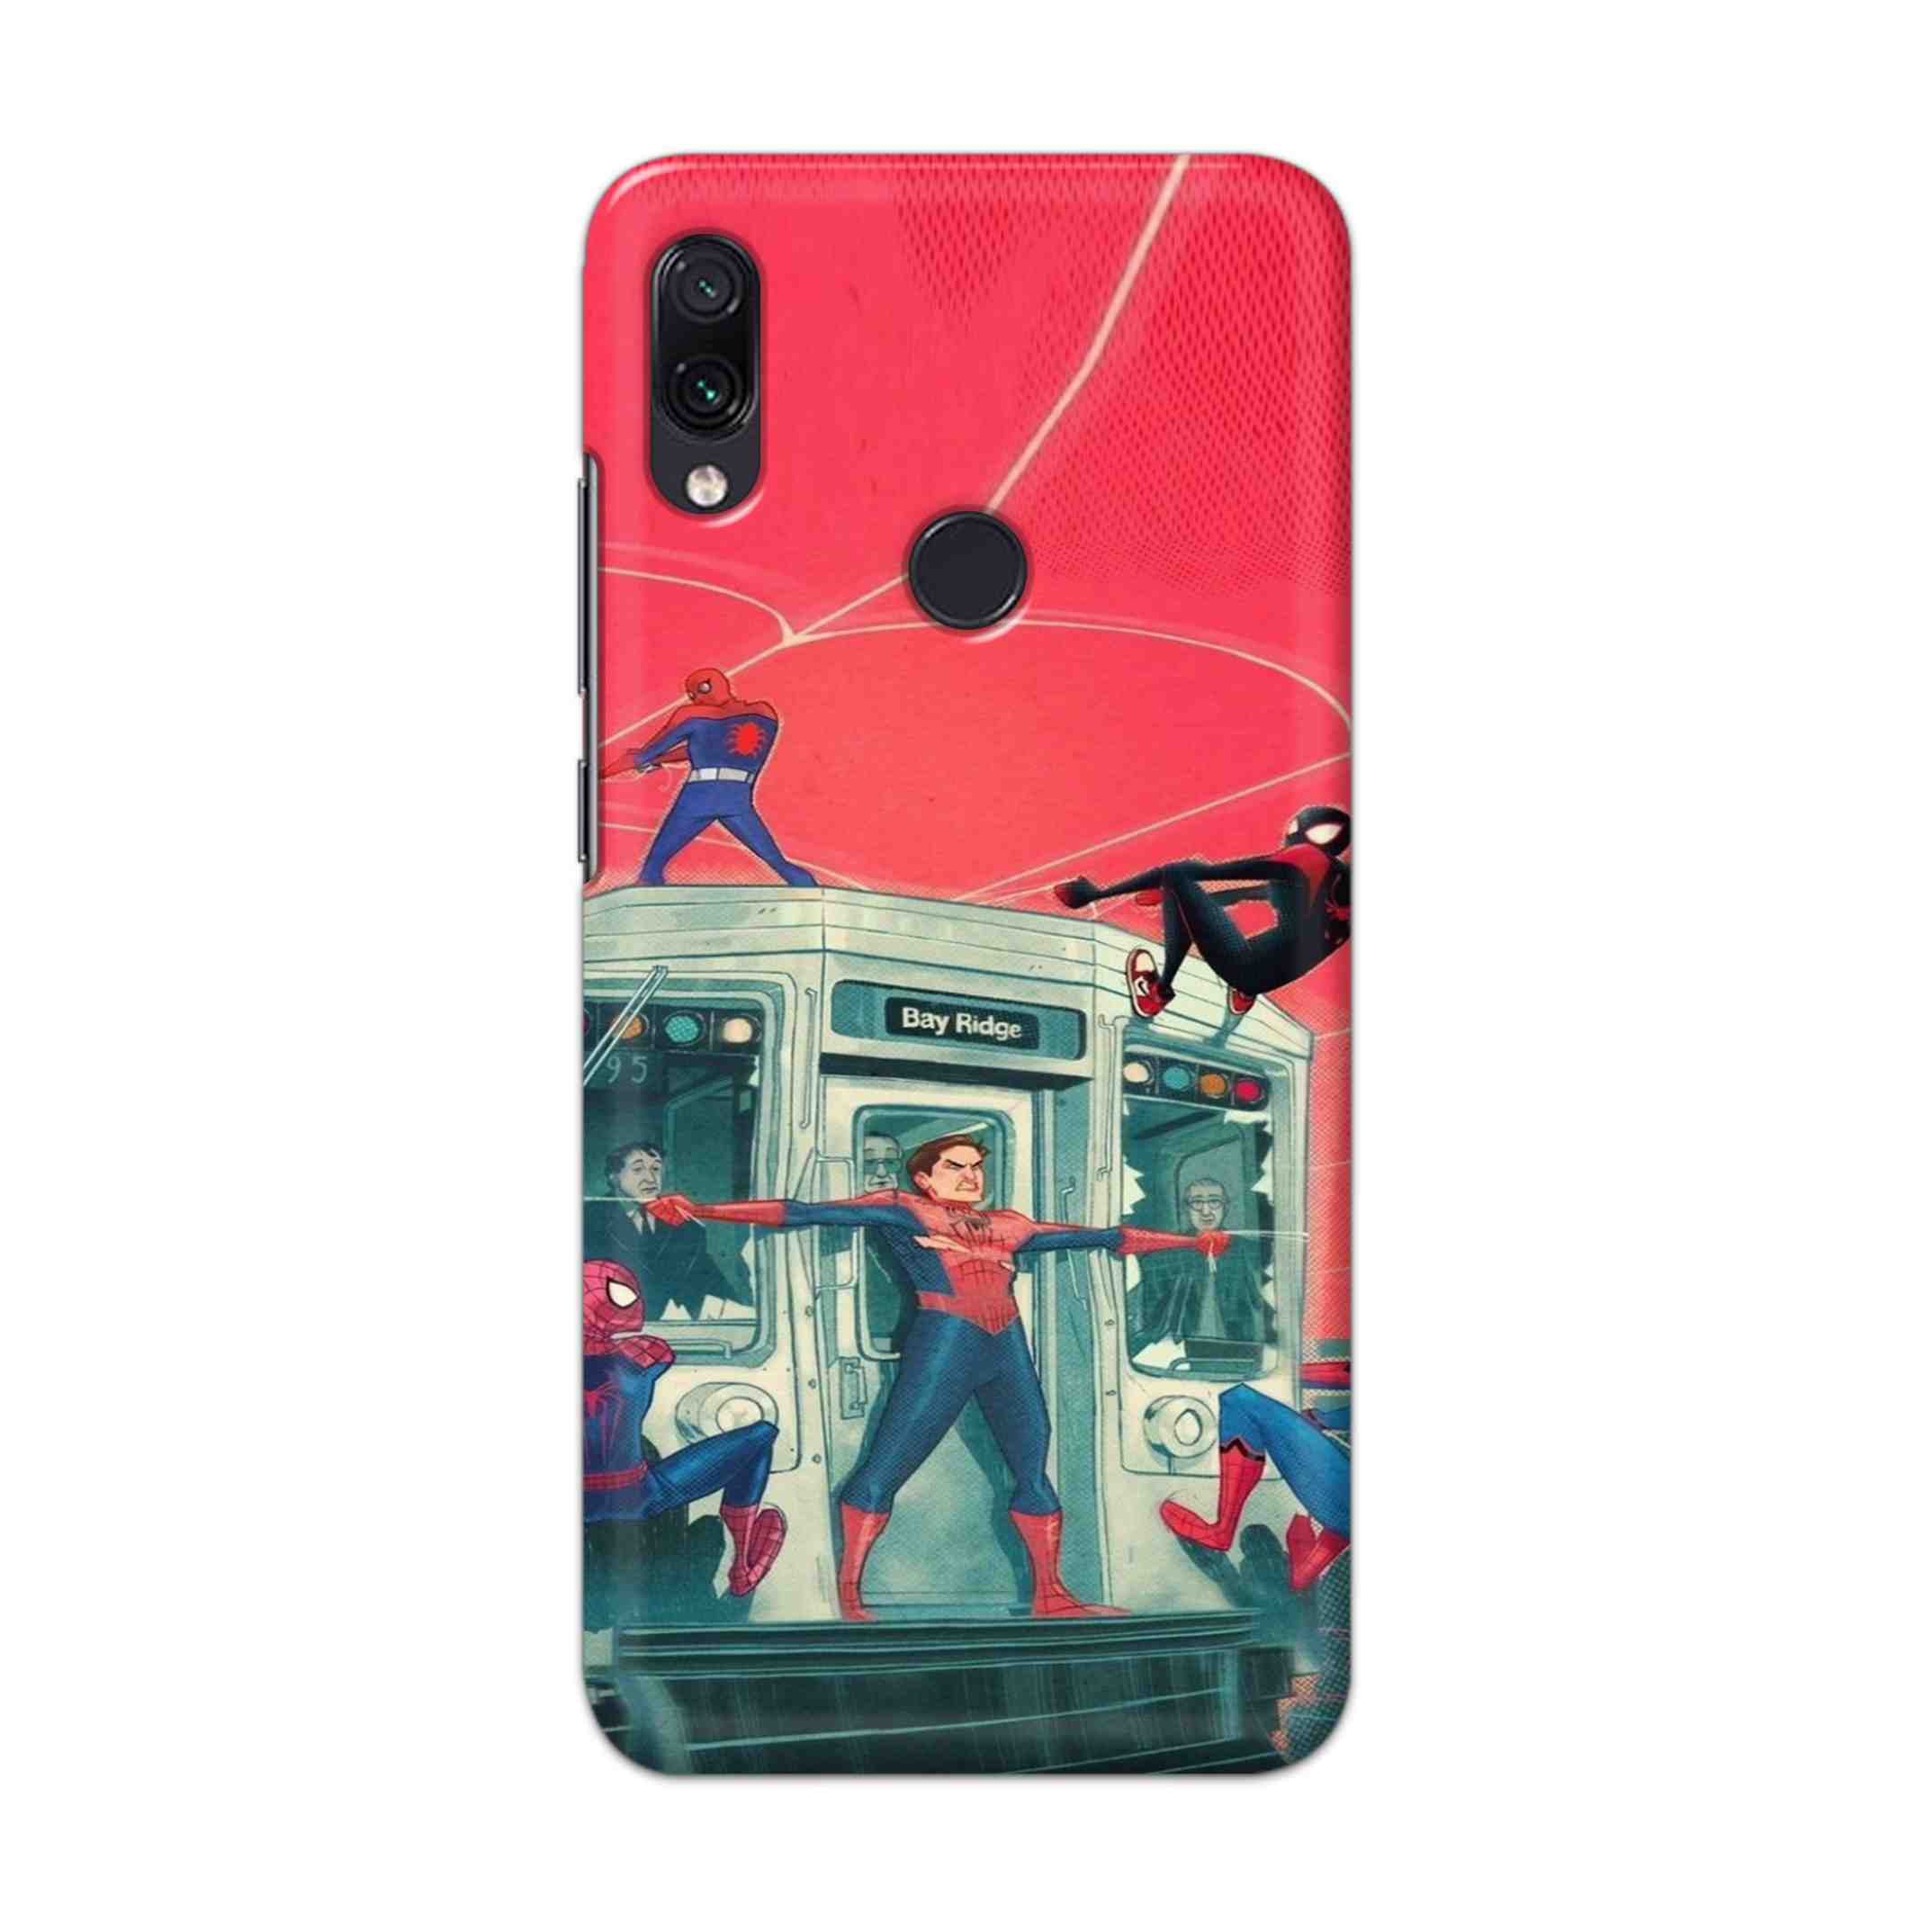 Buy All Spiderman Hard Back Mobile Phone Case Cover For Redmi Note 7 / Note 7 Pro Online